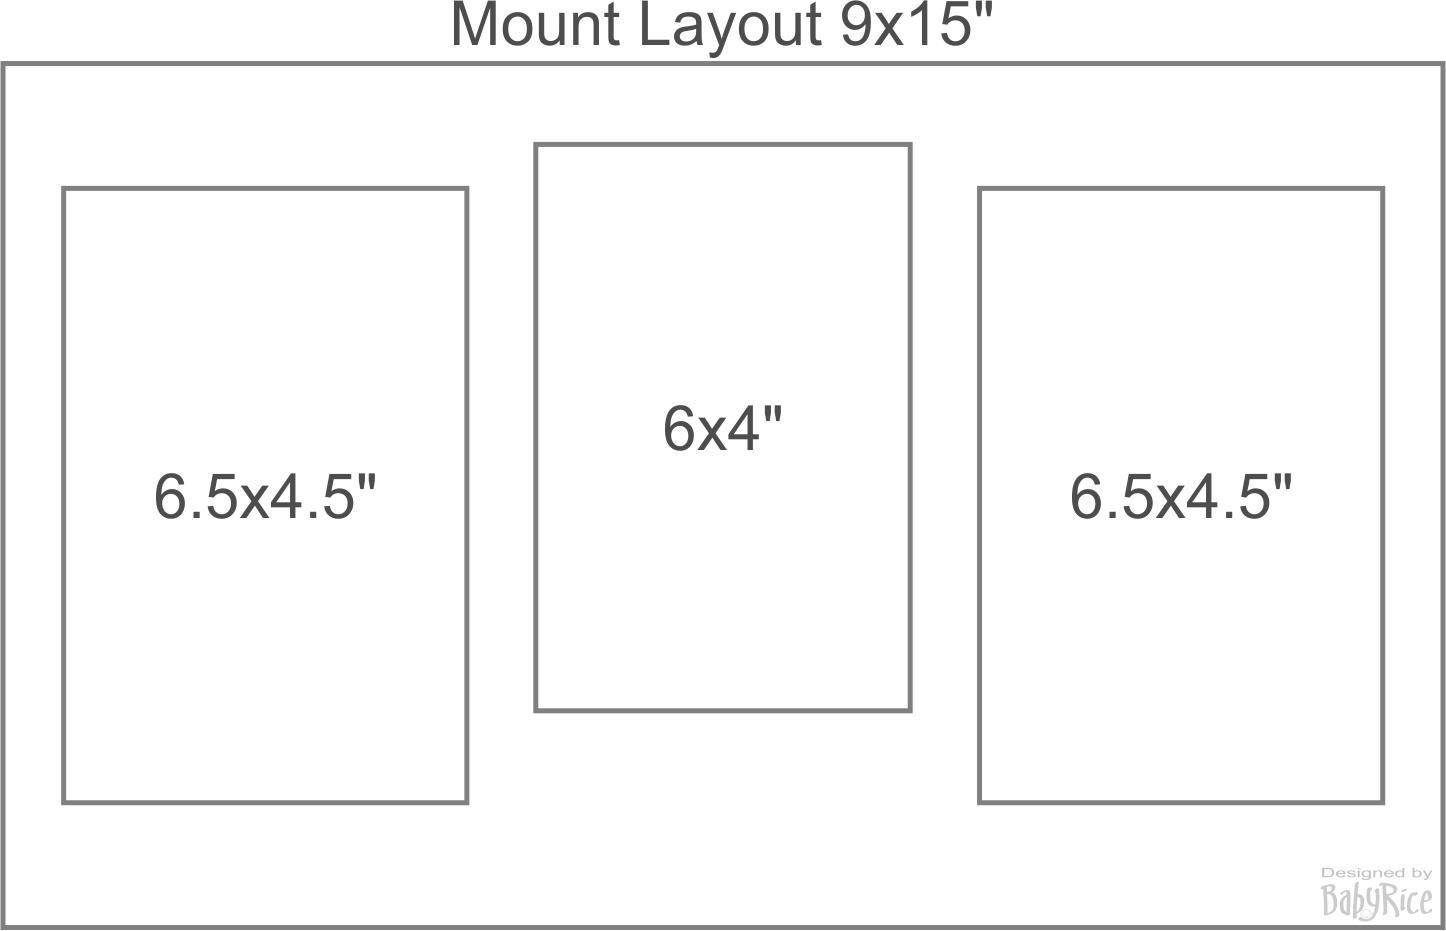 4 Hole Mount Omit Text Specification